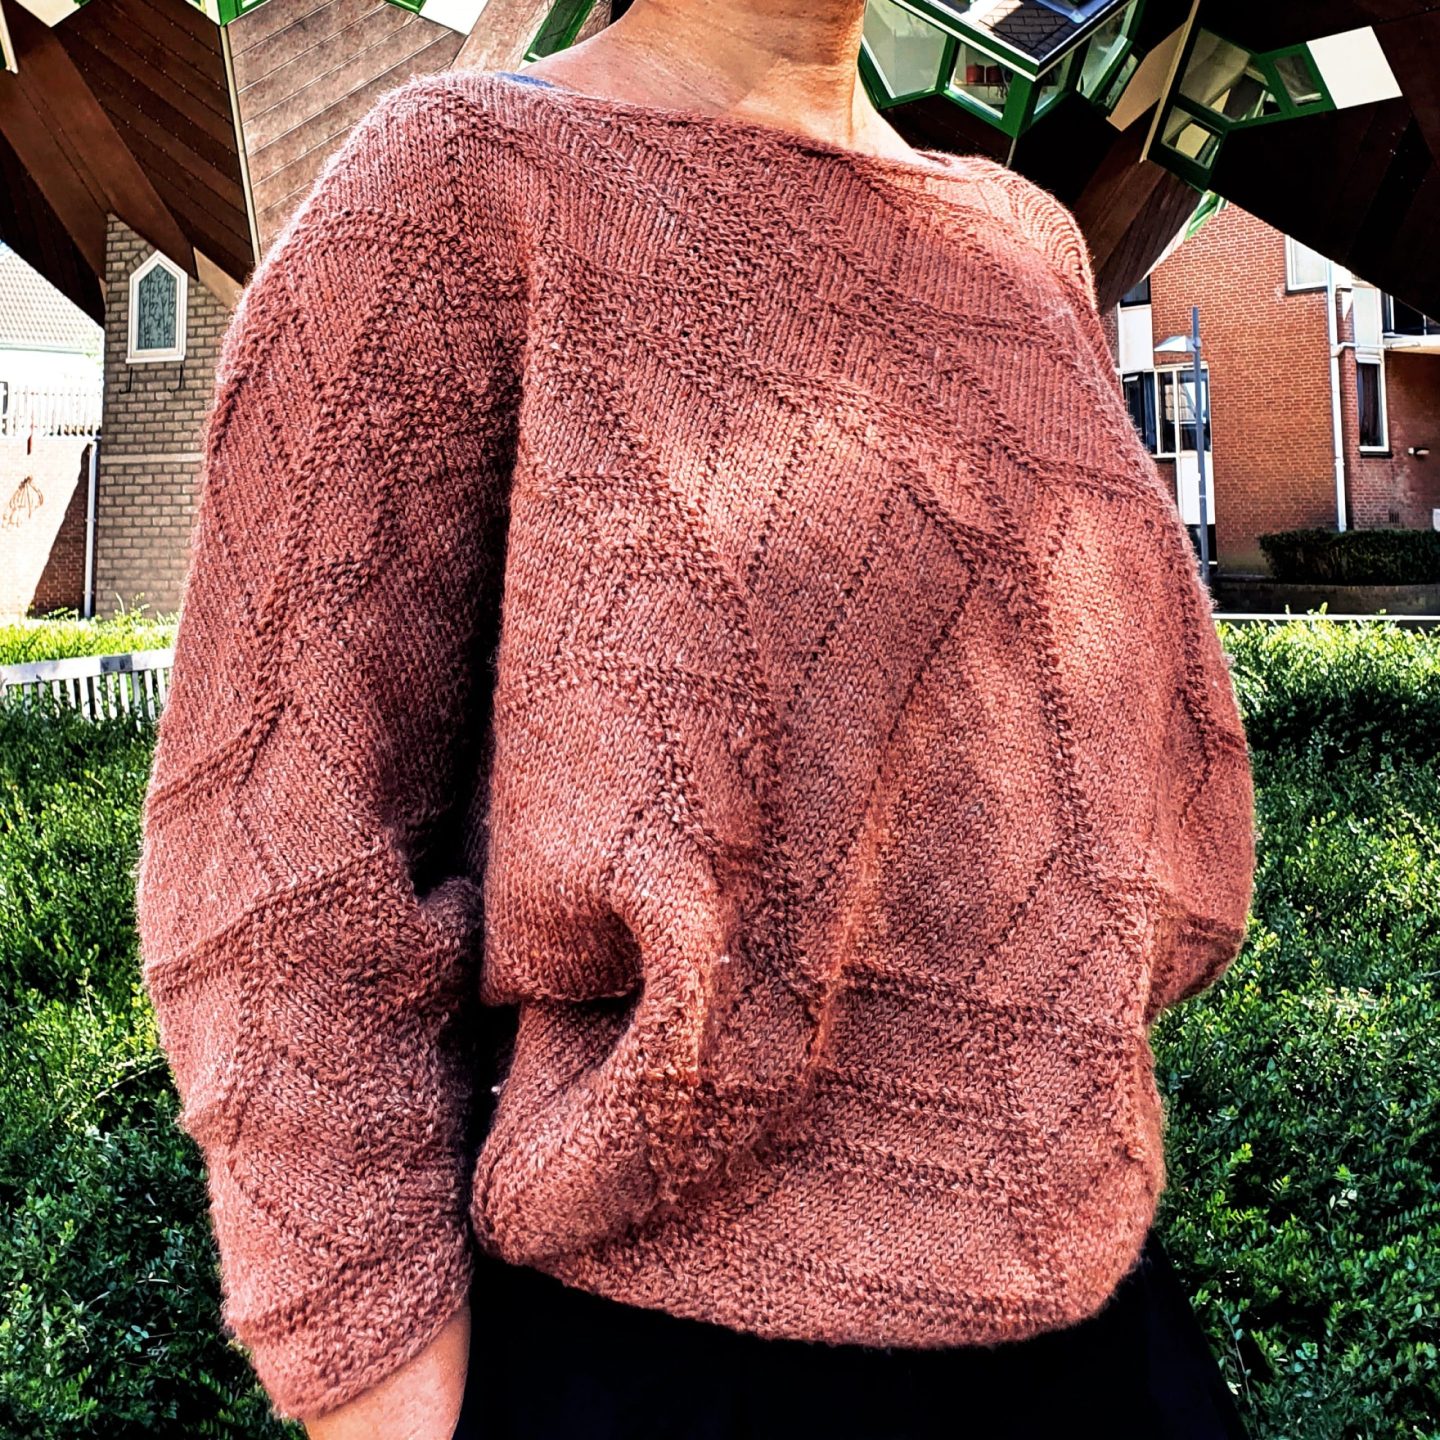 Solitons Sweater: a batwing (dolman sleeve) sweater with a Cellular Automata texture